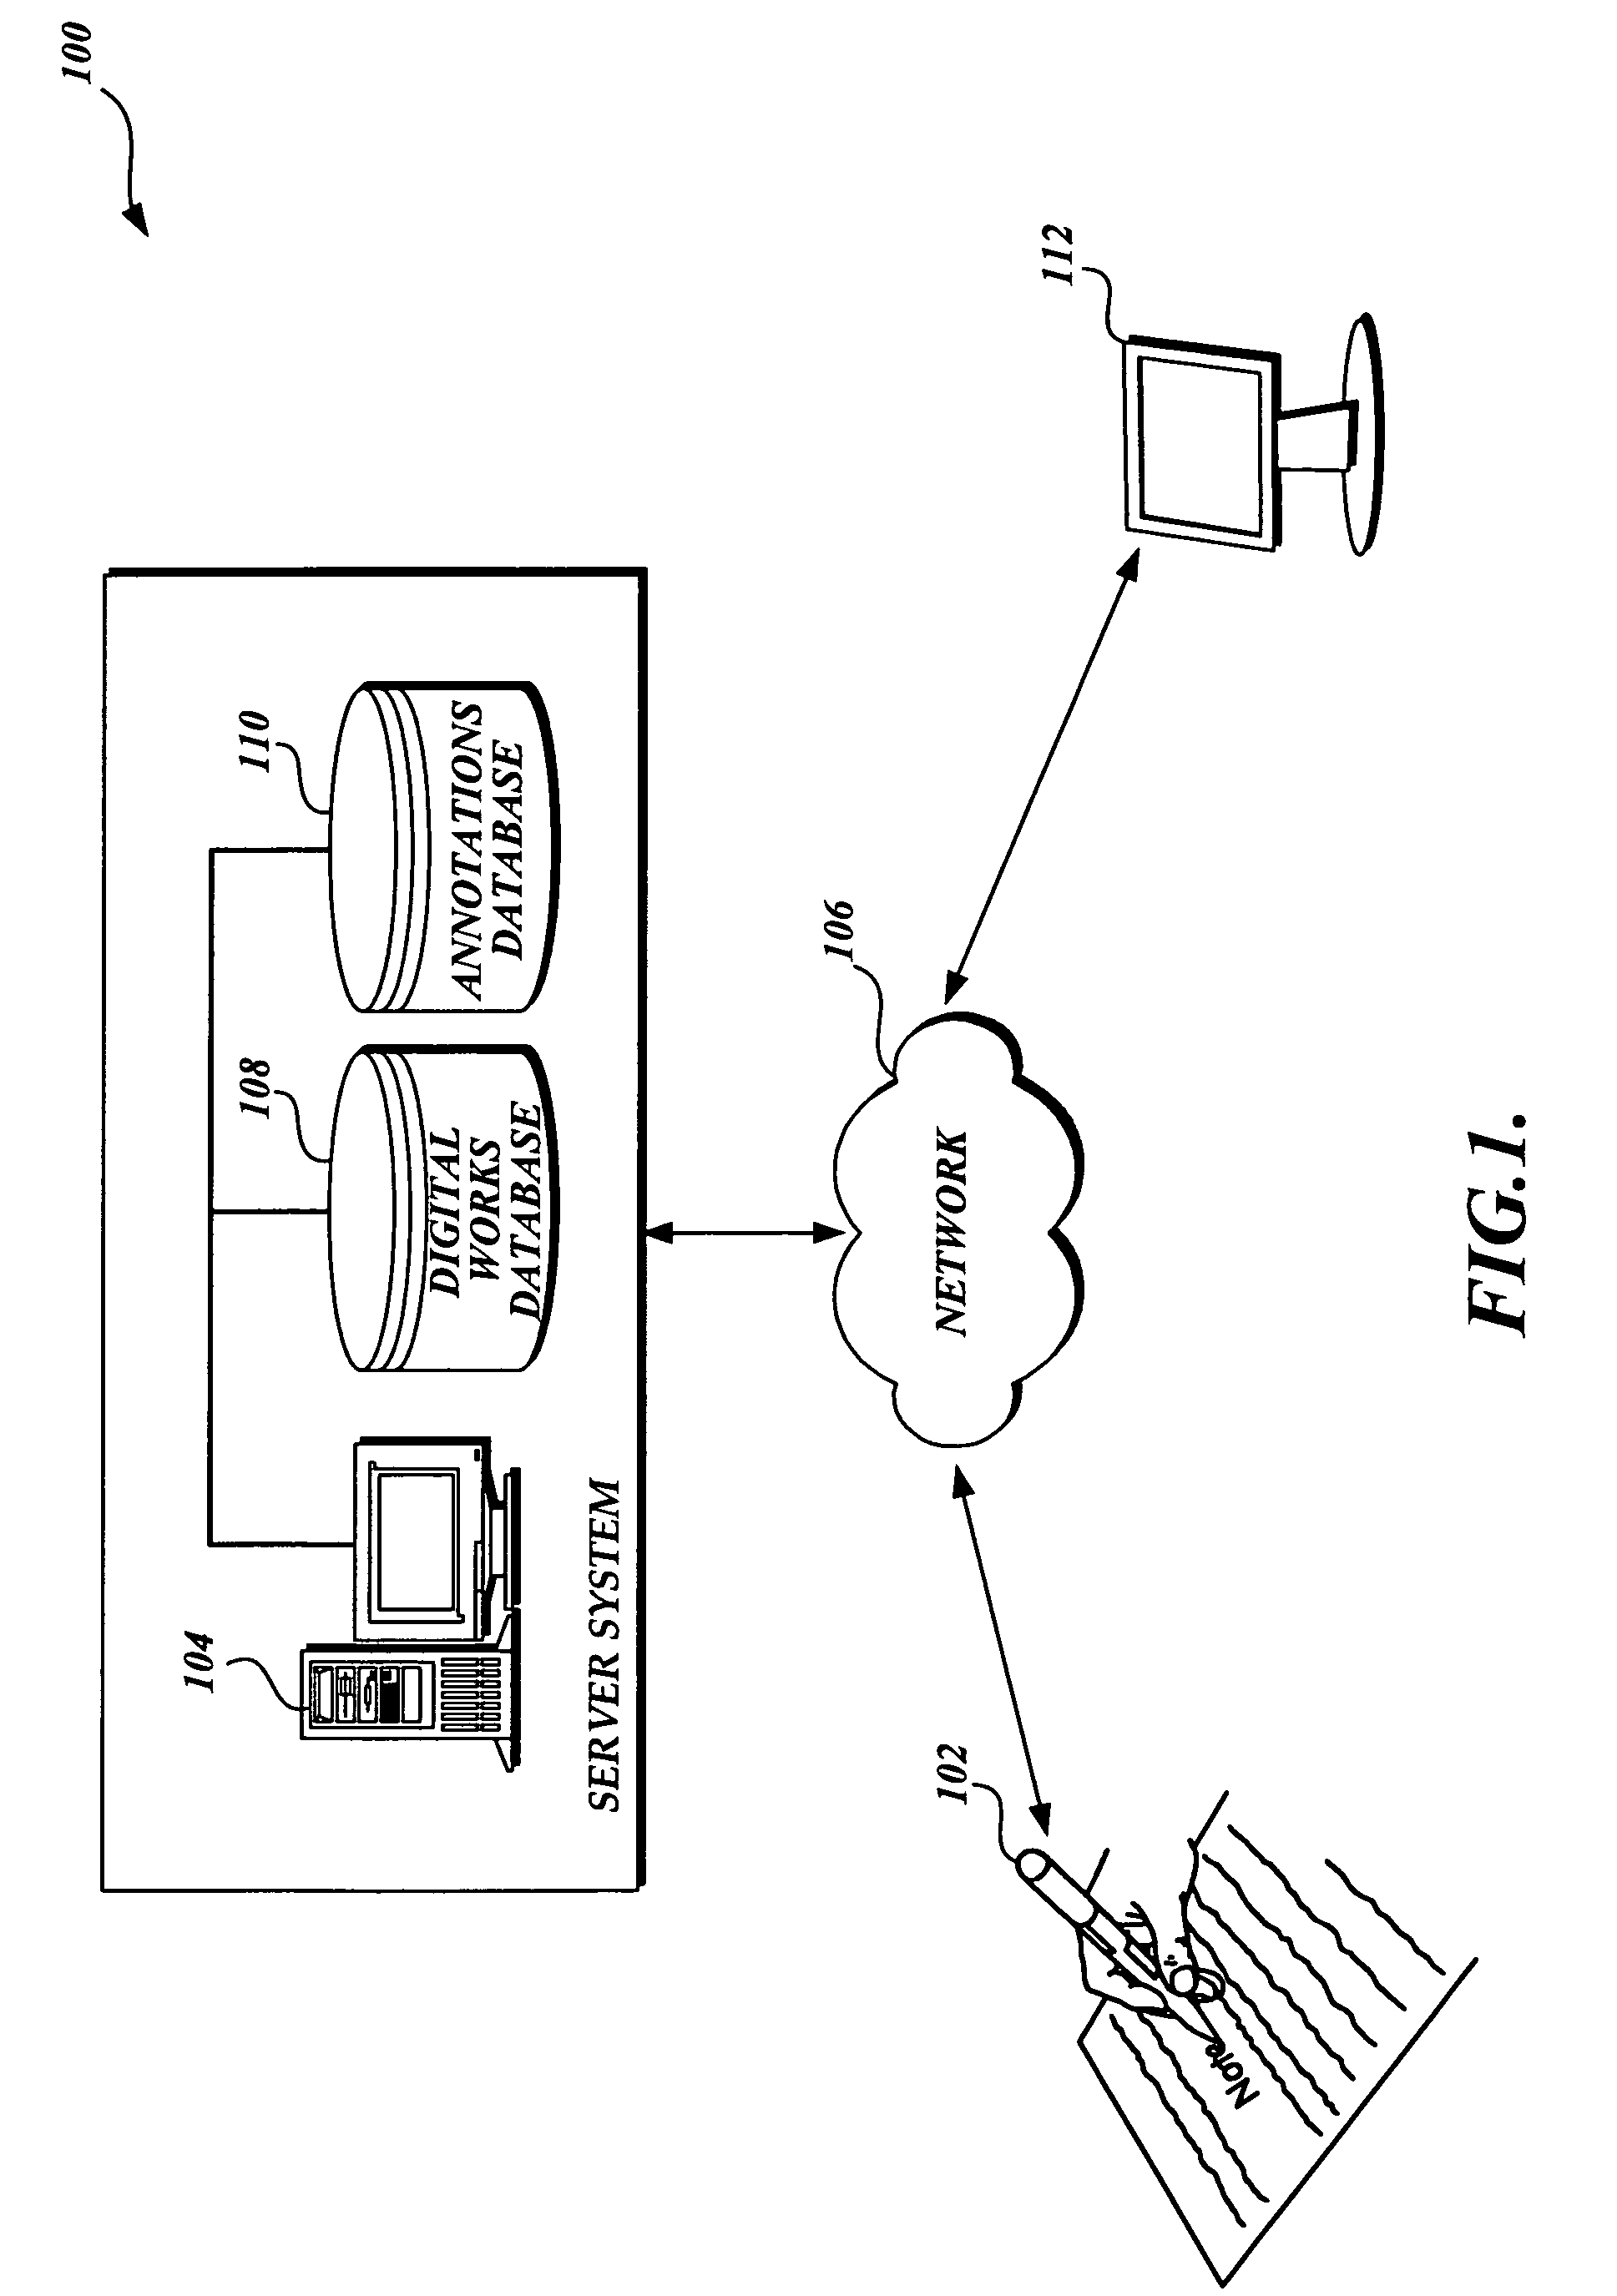 Electronic input device, system, and method using human-comprehensible content to automatically correlate an annotation of a paper document with a digital version of the document